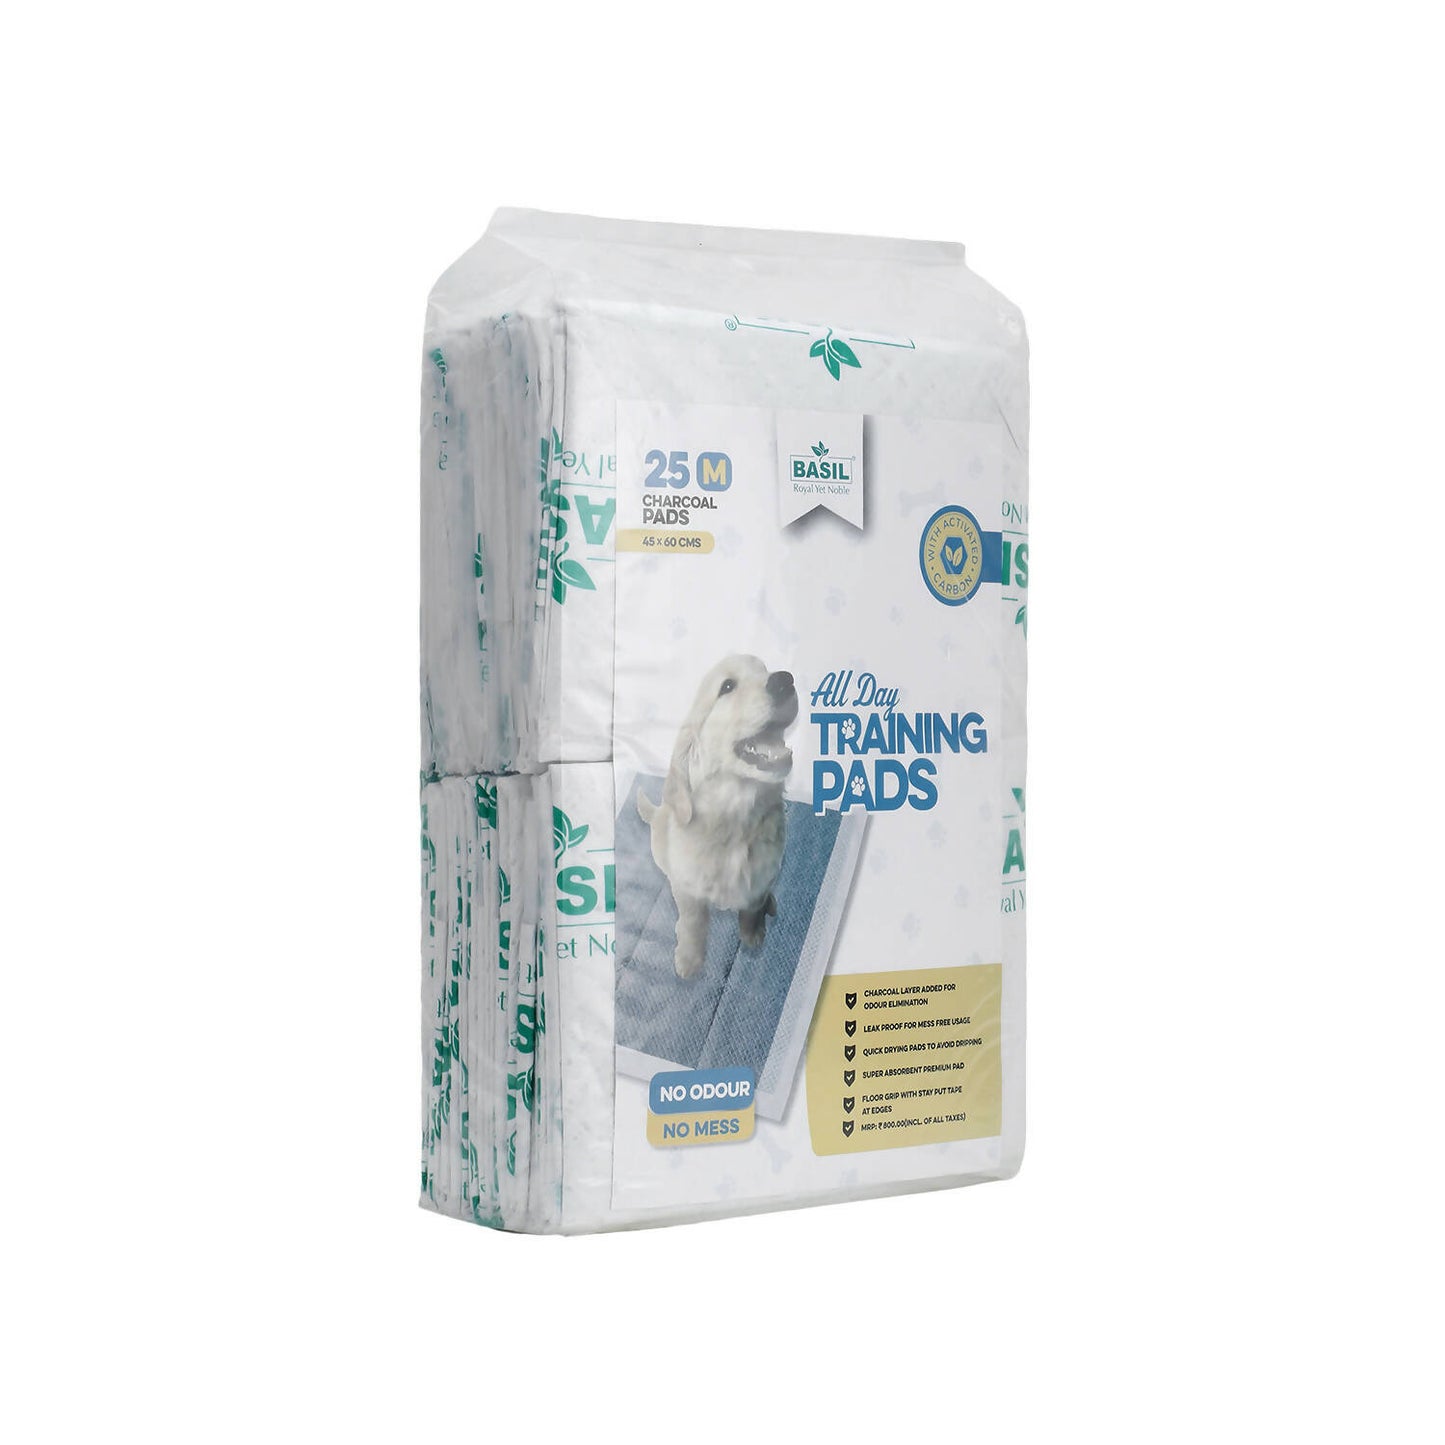 Basil - Pet Training pee pads with Activated Carbon to absorb For Dogs